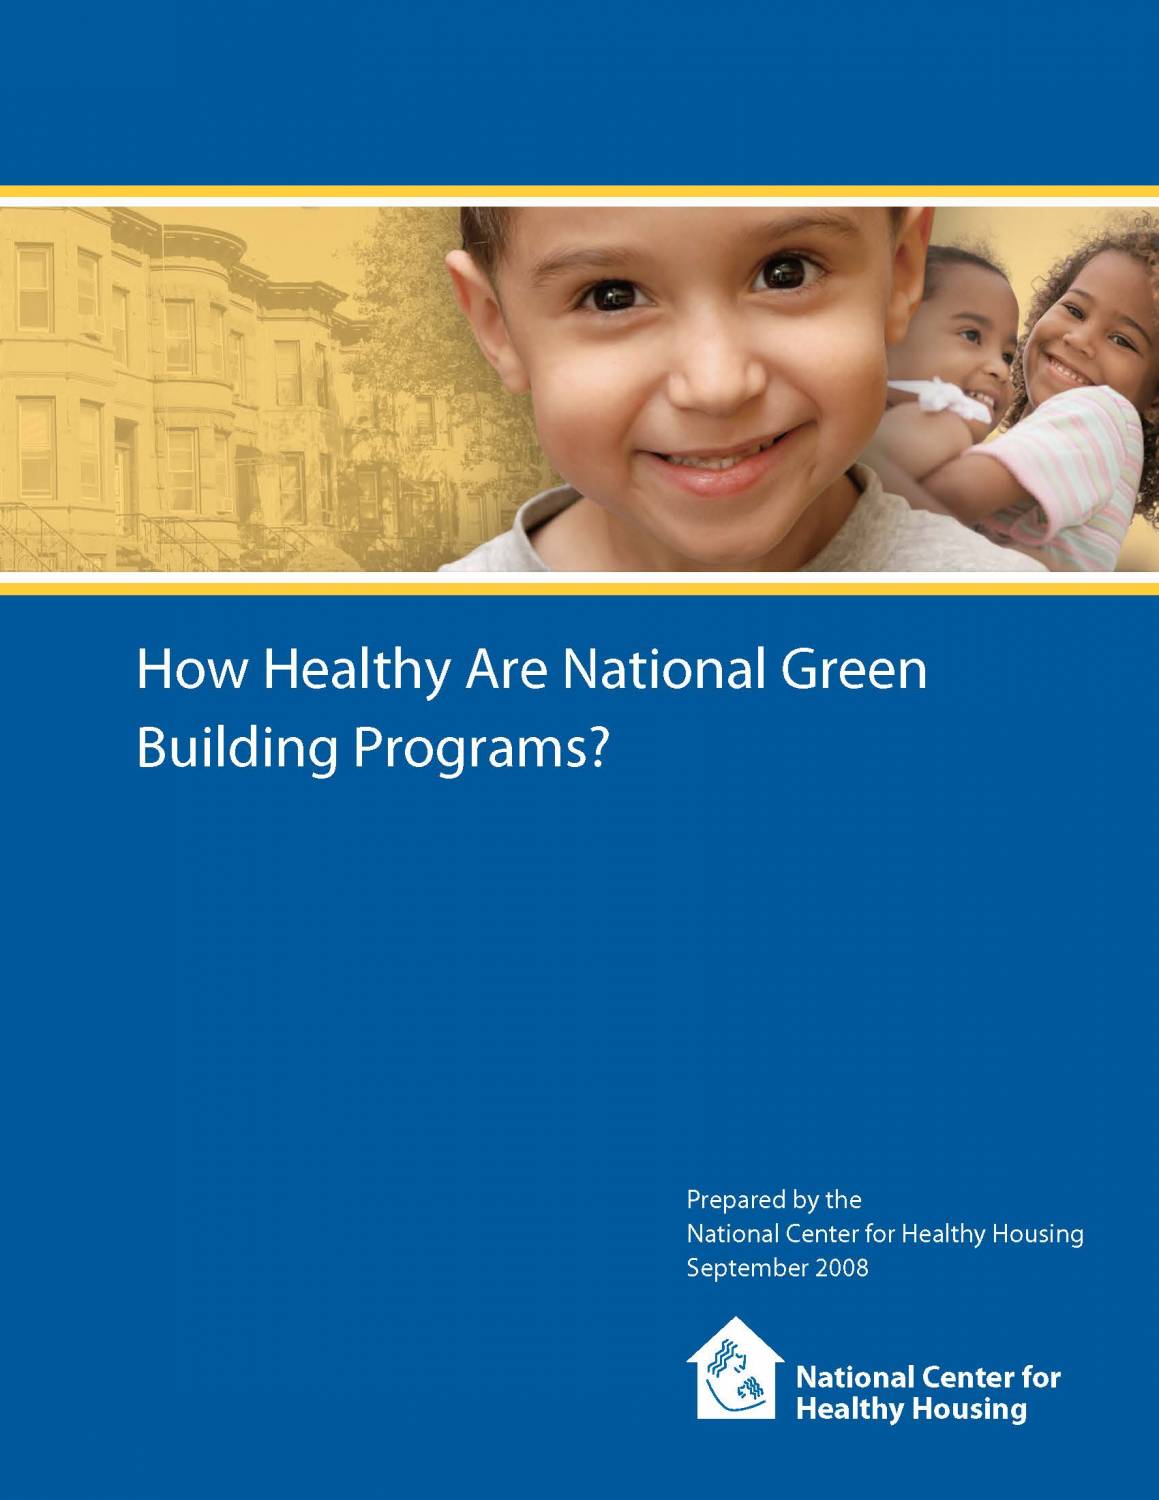 How Healthy Are National Green Building Programs?